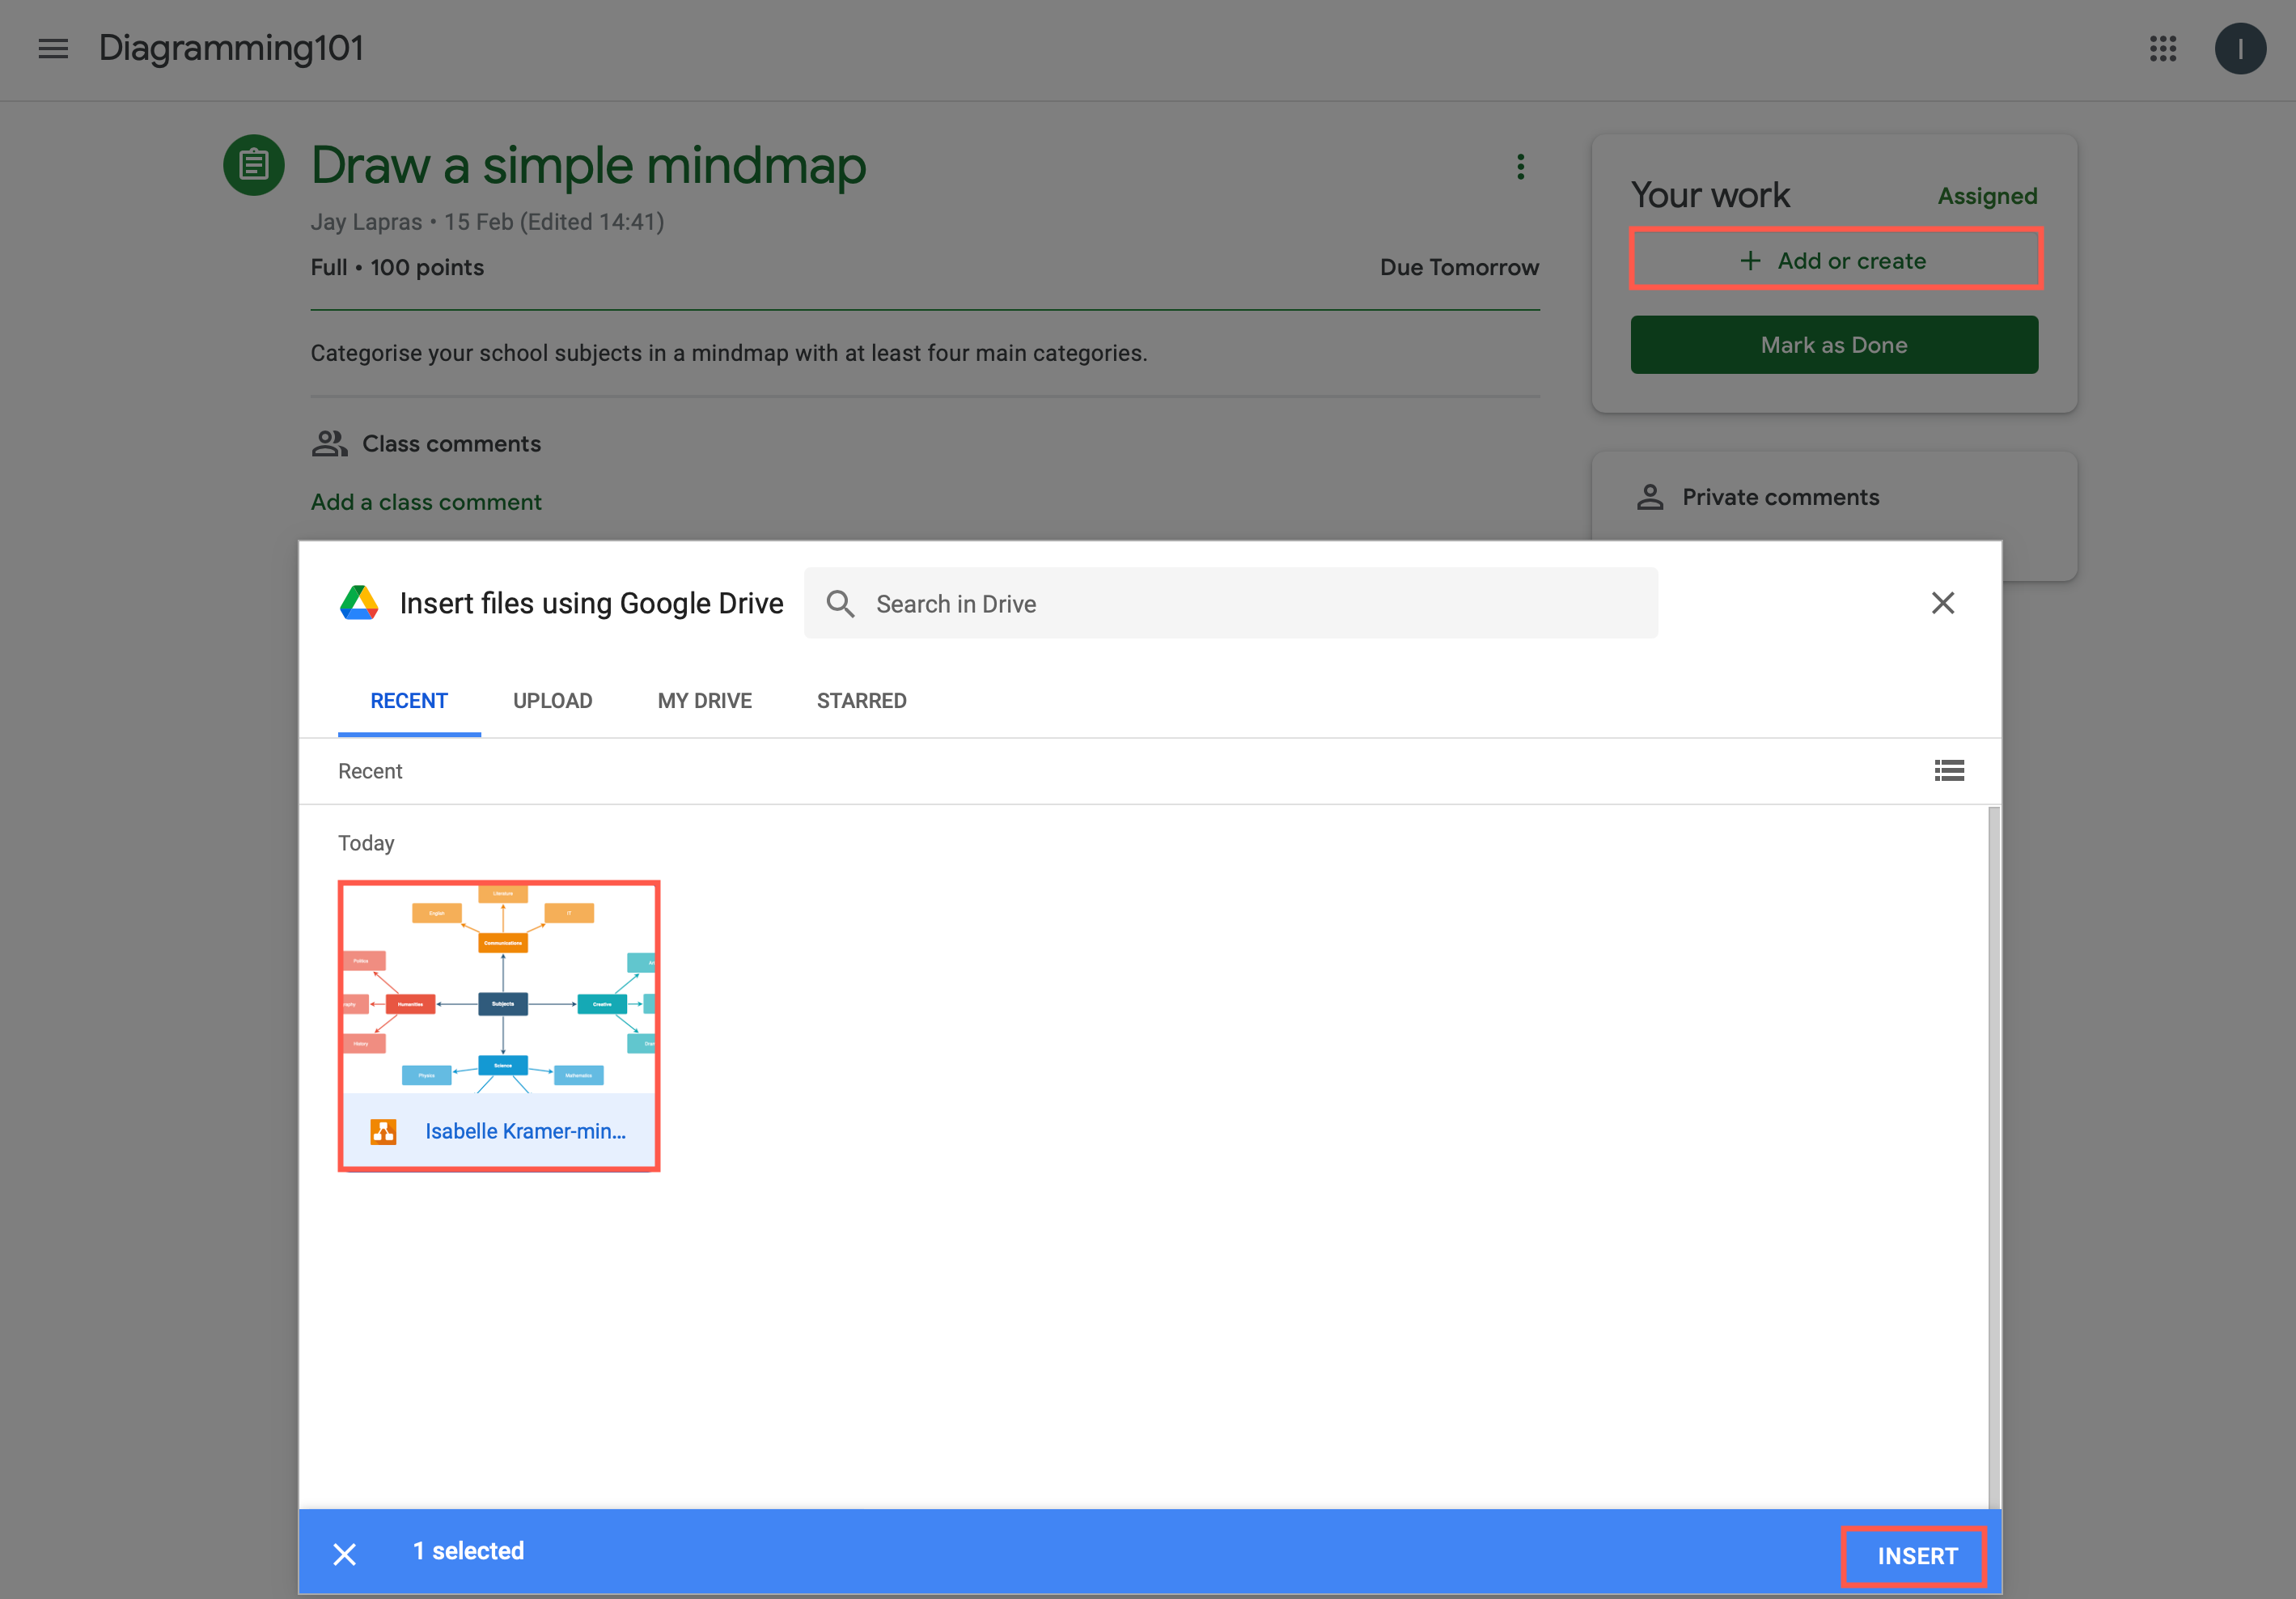 Submit a diagram file from Google Drive as part of your assignment in Google Classroom